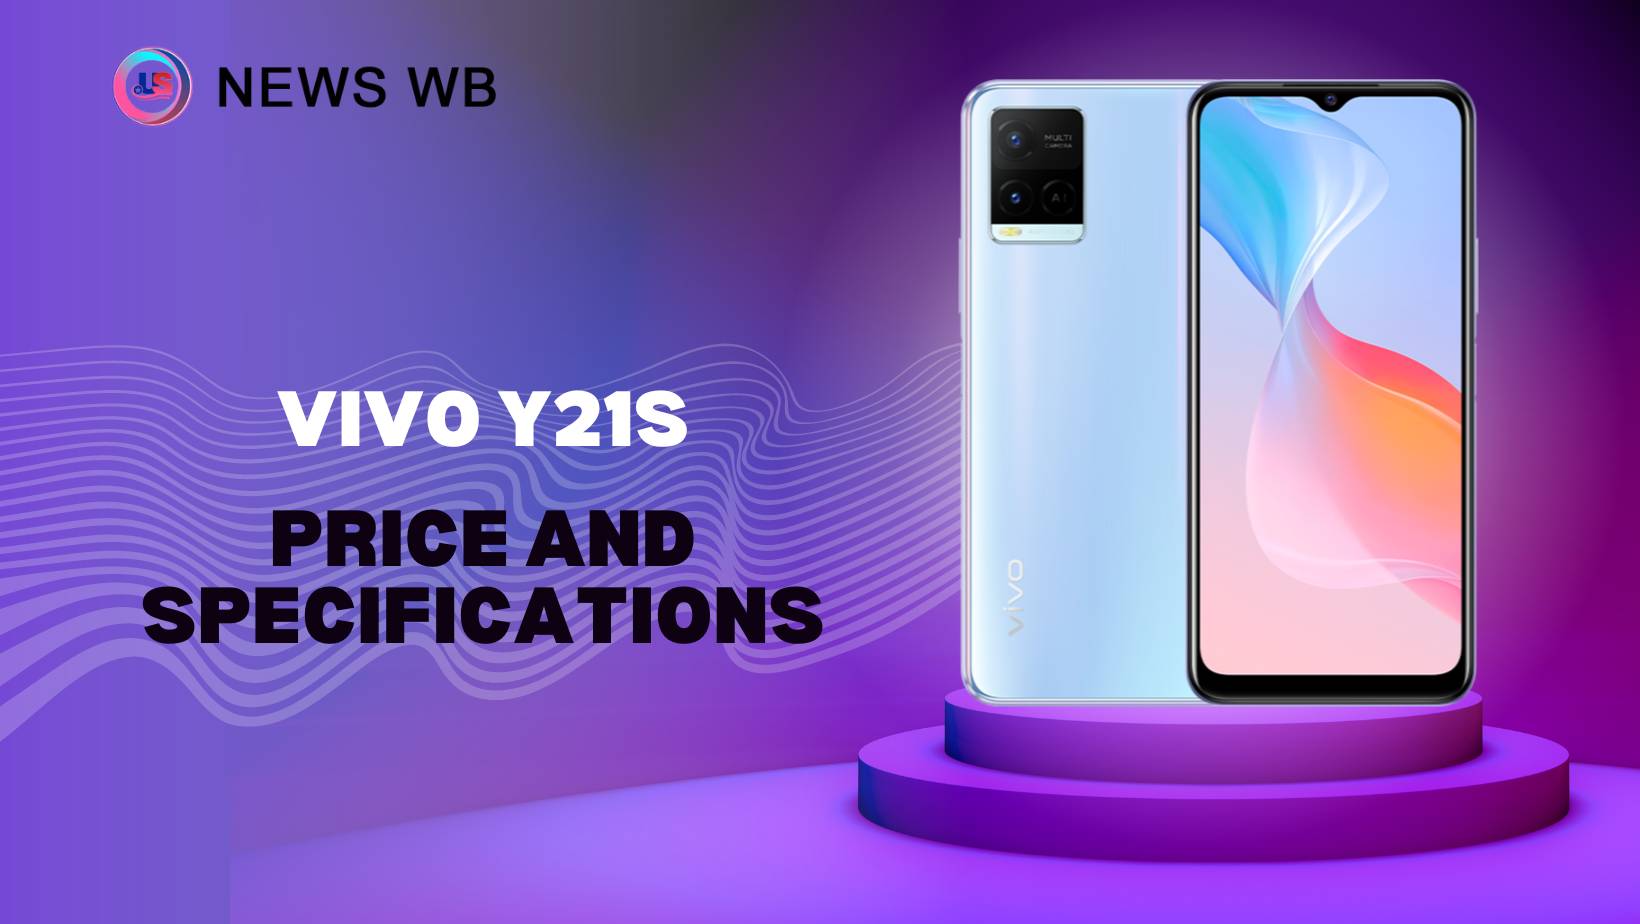 Vivo Y21s Price and Specifications